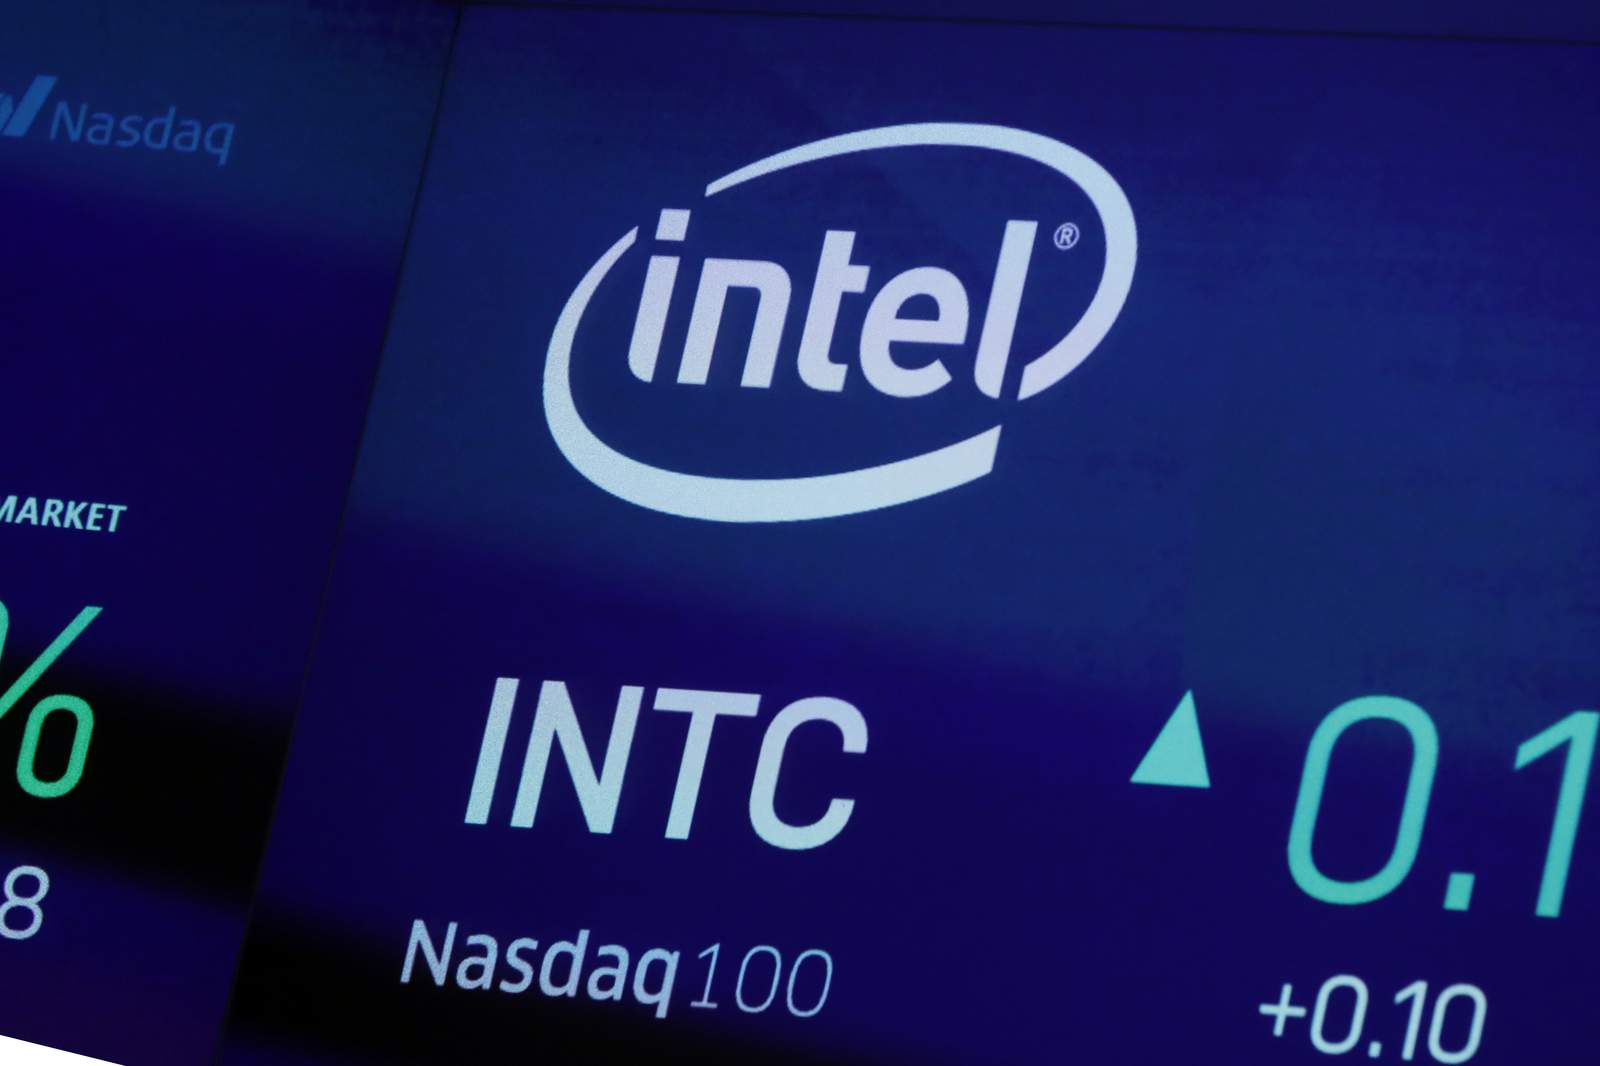 Intel's stock plunges as work on new computer chip bogs down